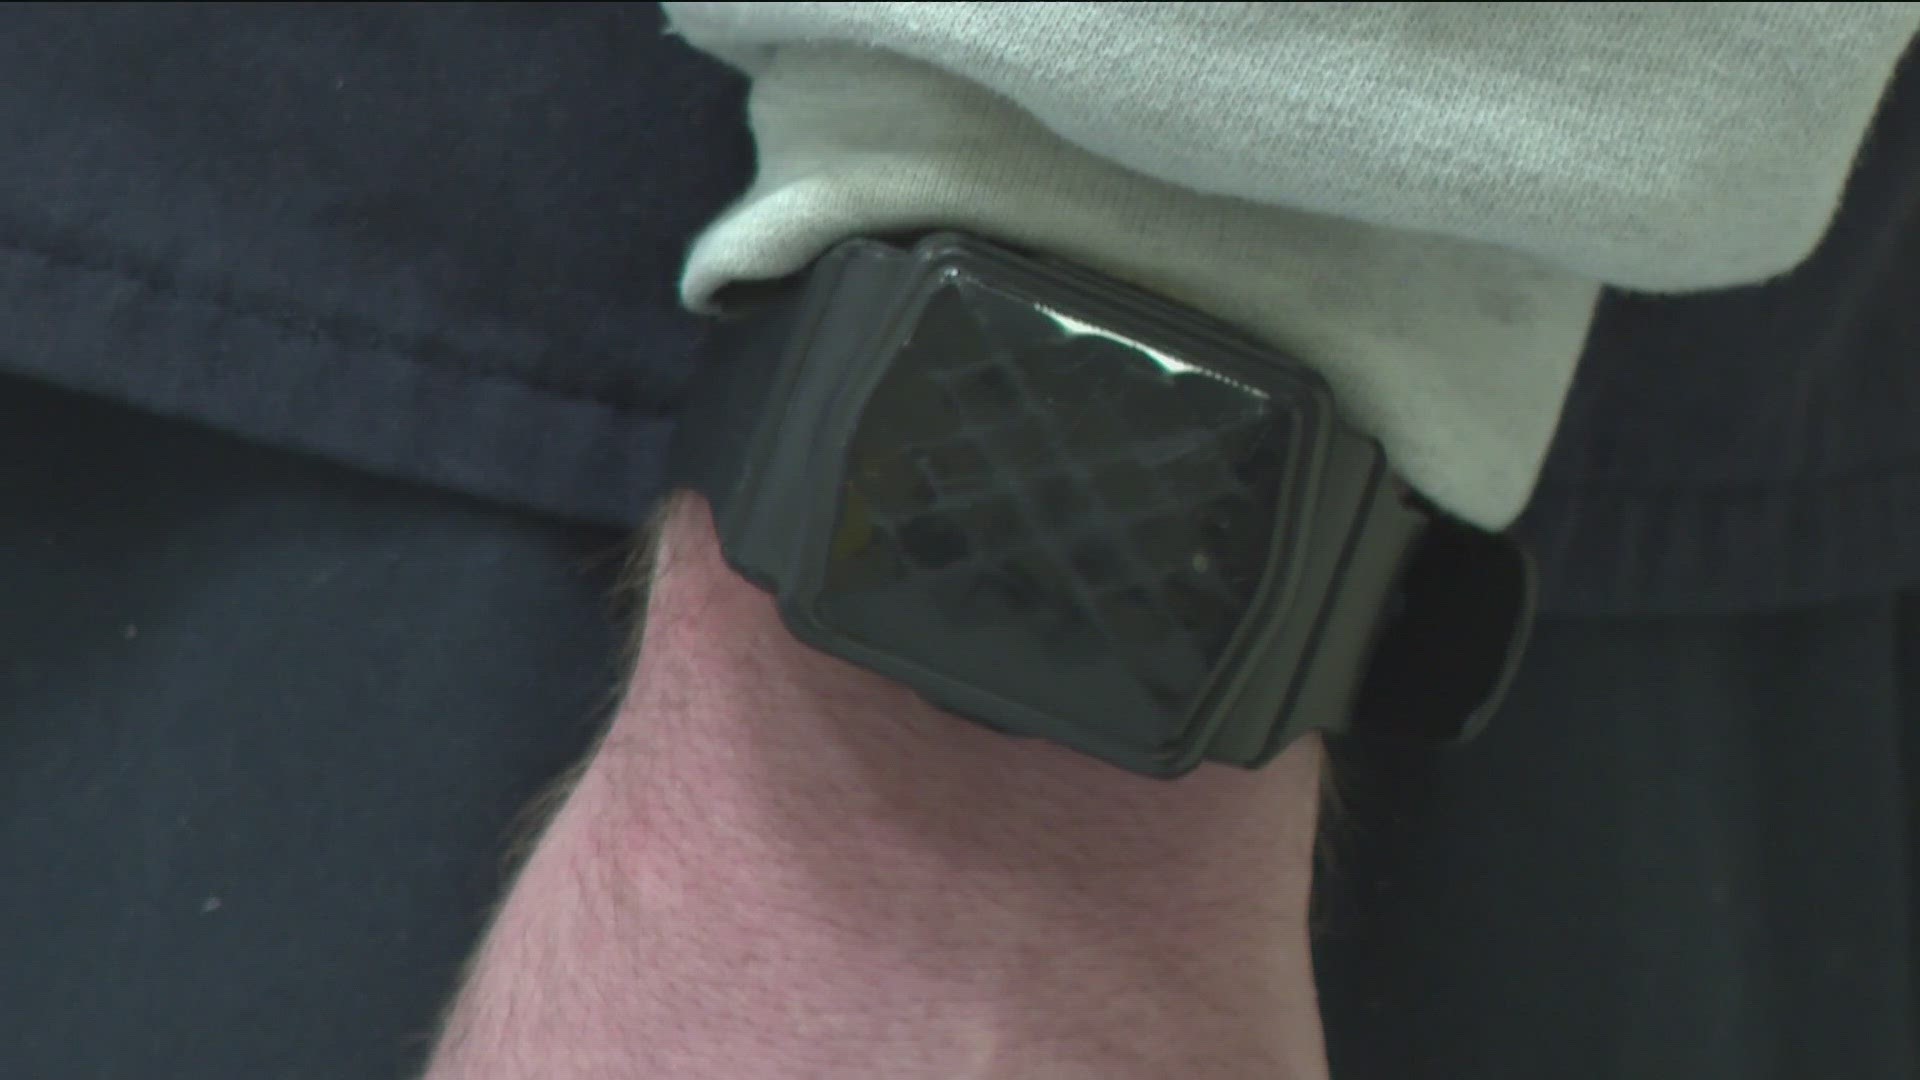 This afternoon the Fulton County commissioners said the department is failing to use technology the county purchased to monitor the health of inmates at the jail.